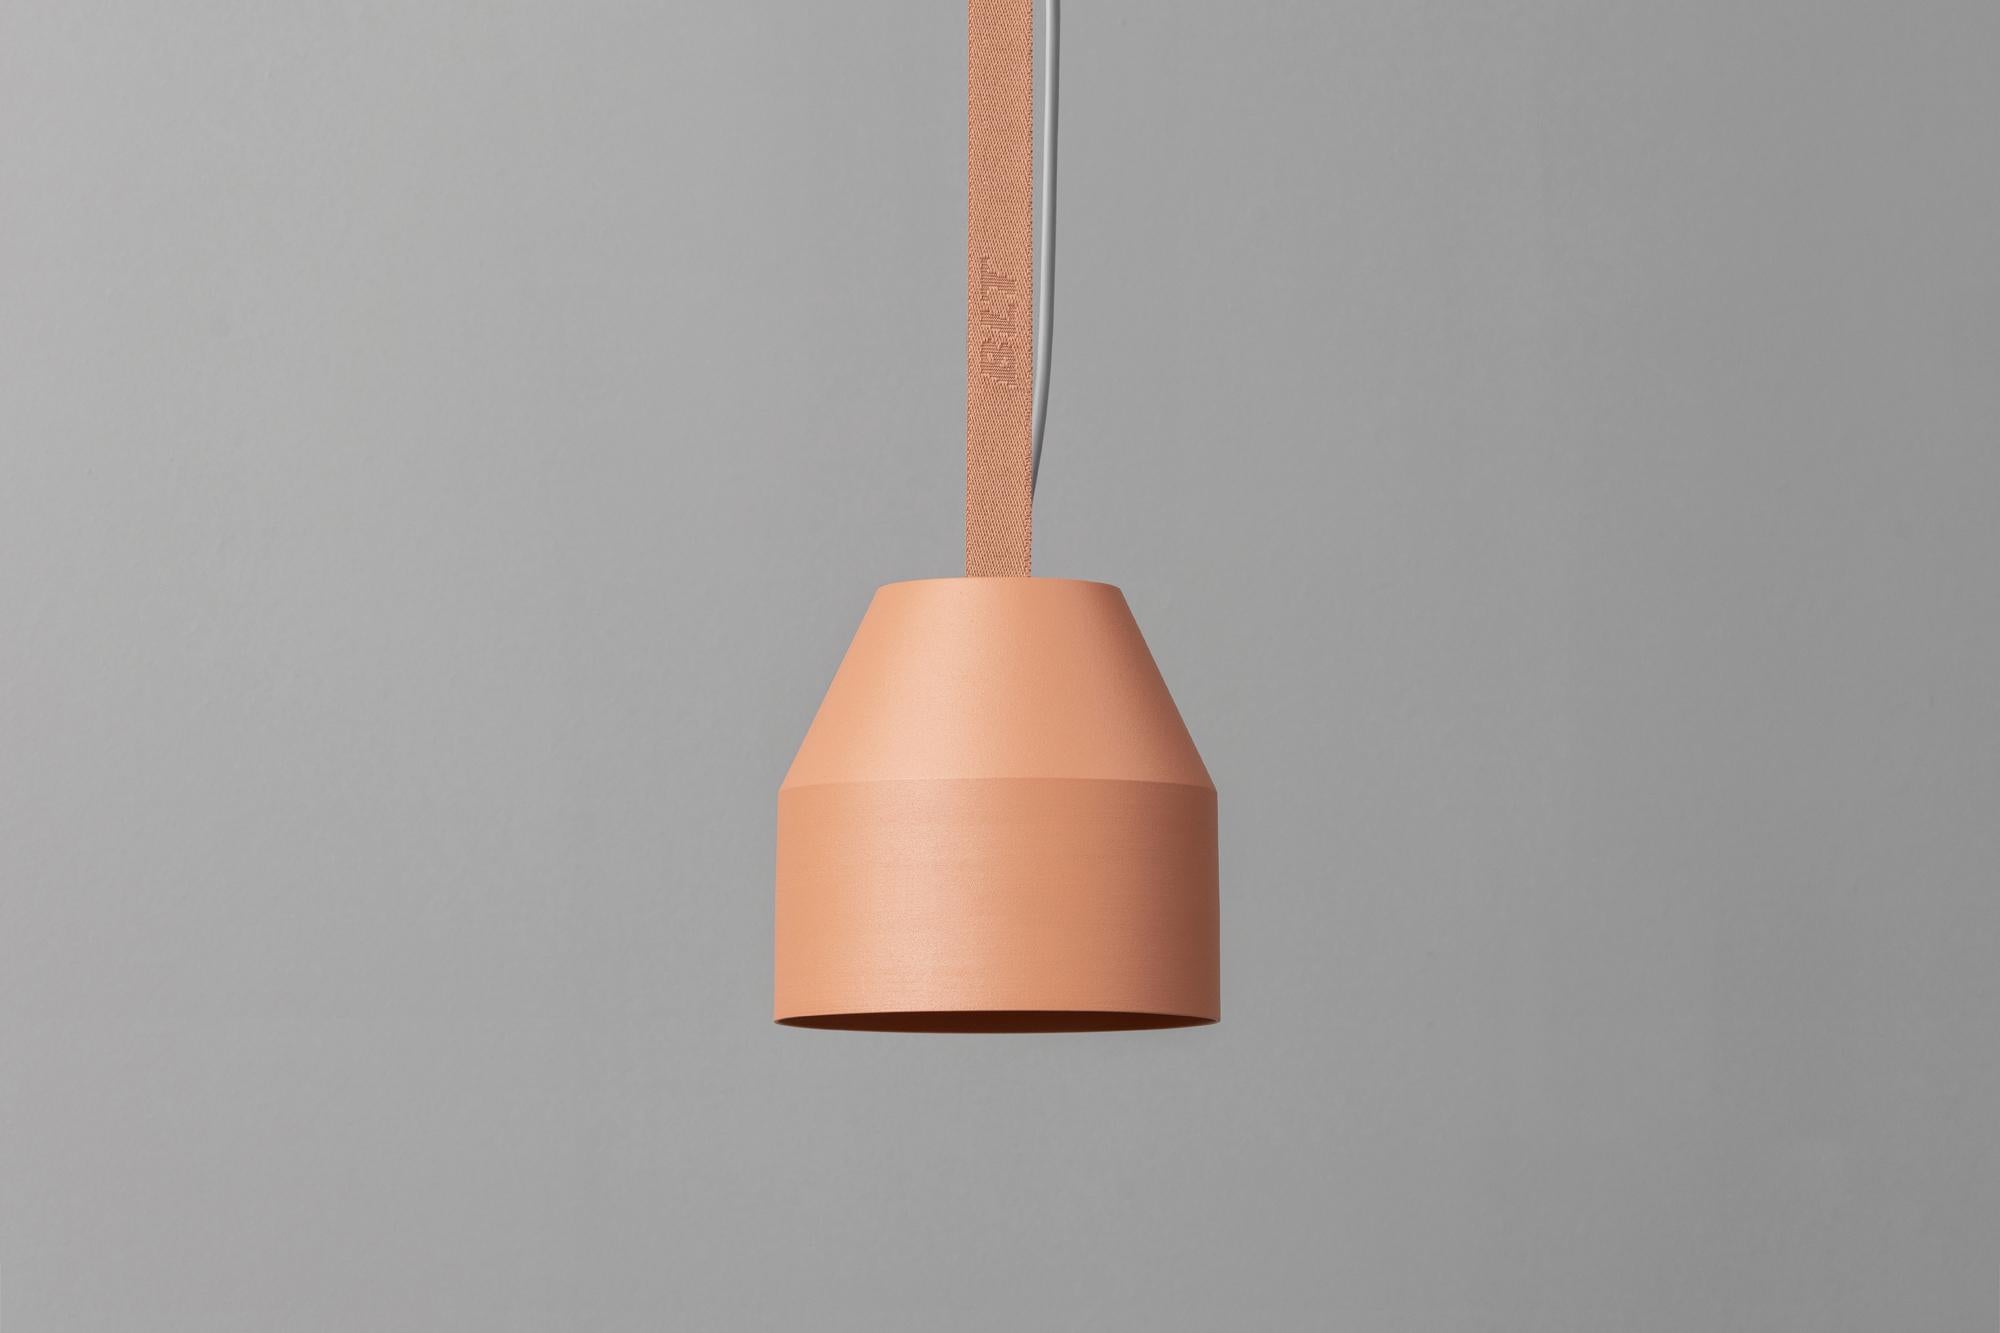 BLT_CAP Big Coral Pendant Lamp by +kouple
Dimensions: Ø 16 x H 16,5 cm. 
Materials: Powder-coated steel and textile.

Available in different color options. The rod length is 250 cm. Please contact us.

All our lamps can be wired according to each